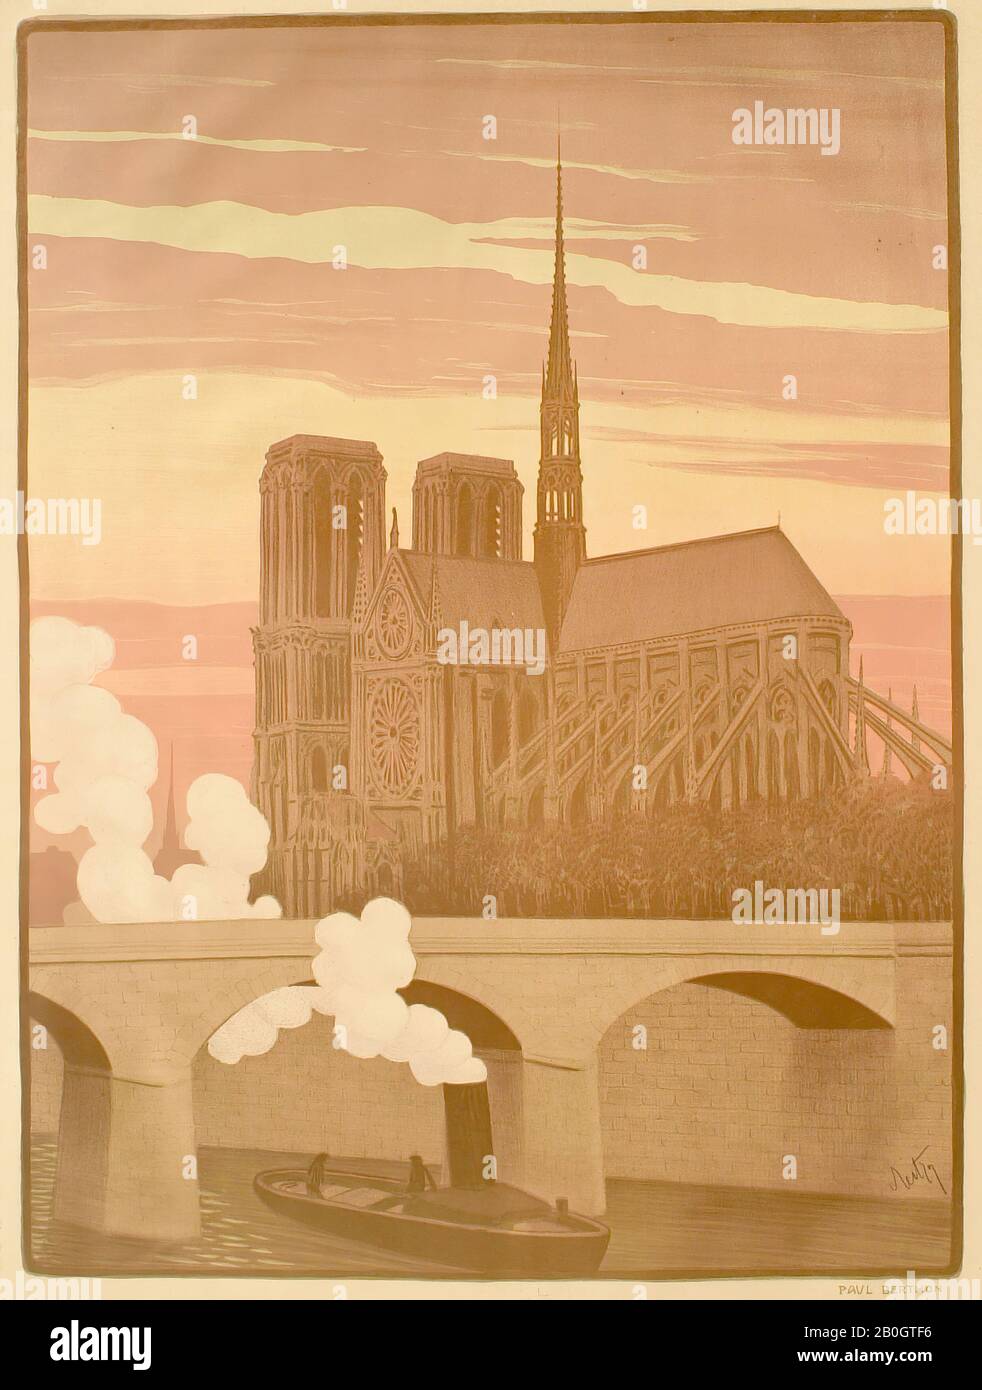 Paul Berthon, French, 1872–1909, The Apse of Notre Dame de Paris Seen from the Seine, 1900, Lithograph with three stones on paper, image: 22 5/16 x 16 1/2 in. (56.7 x 41.9 cm Stock Photo